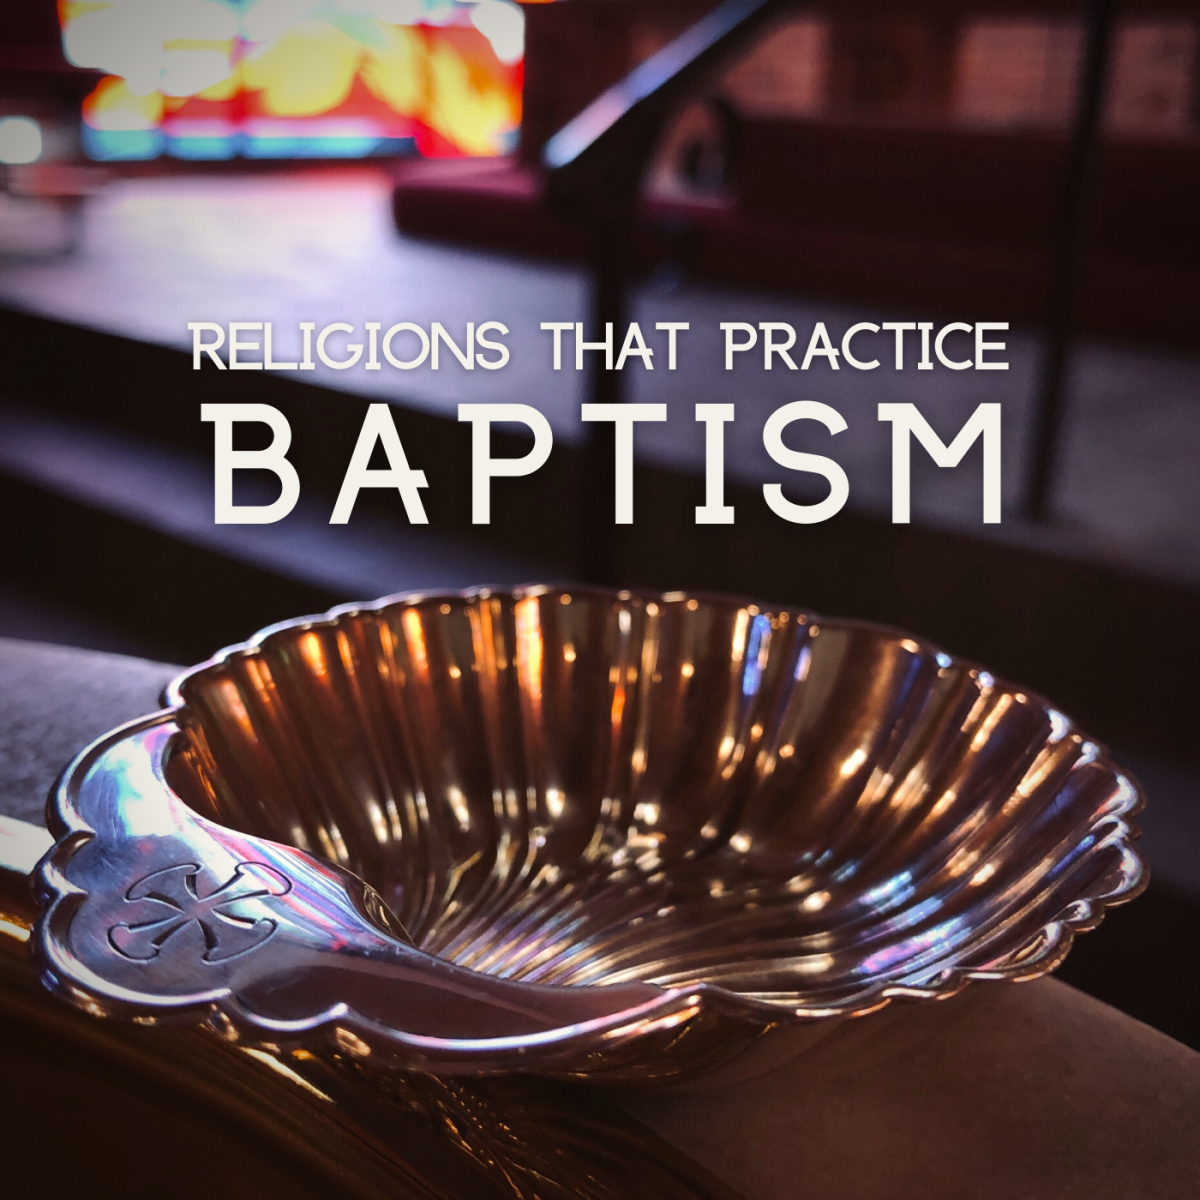 Types of Baptism in Christianity and Other Religions